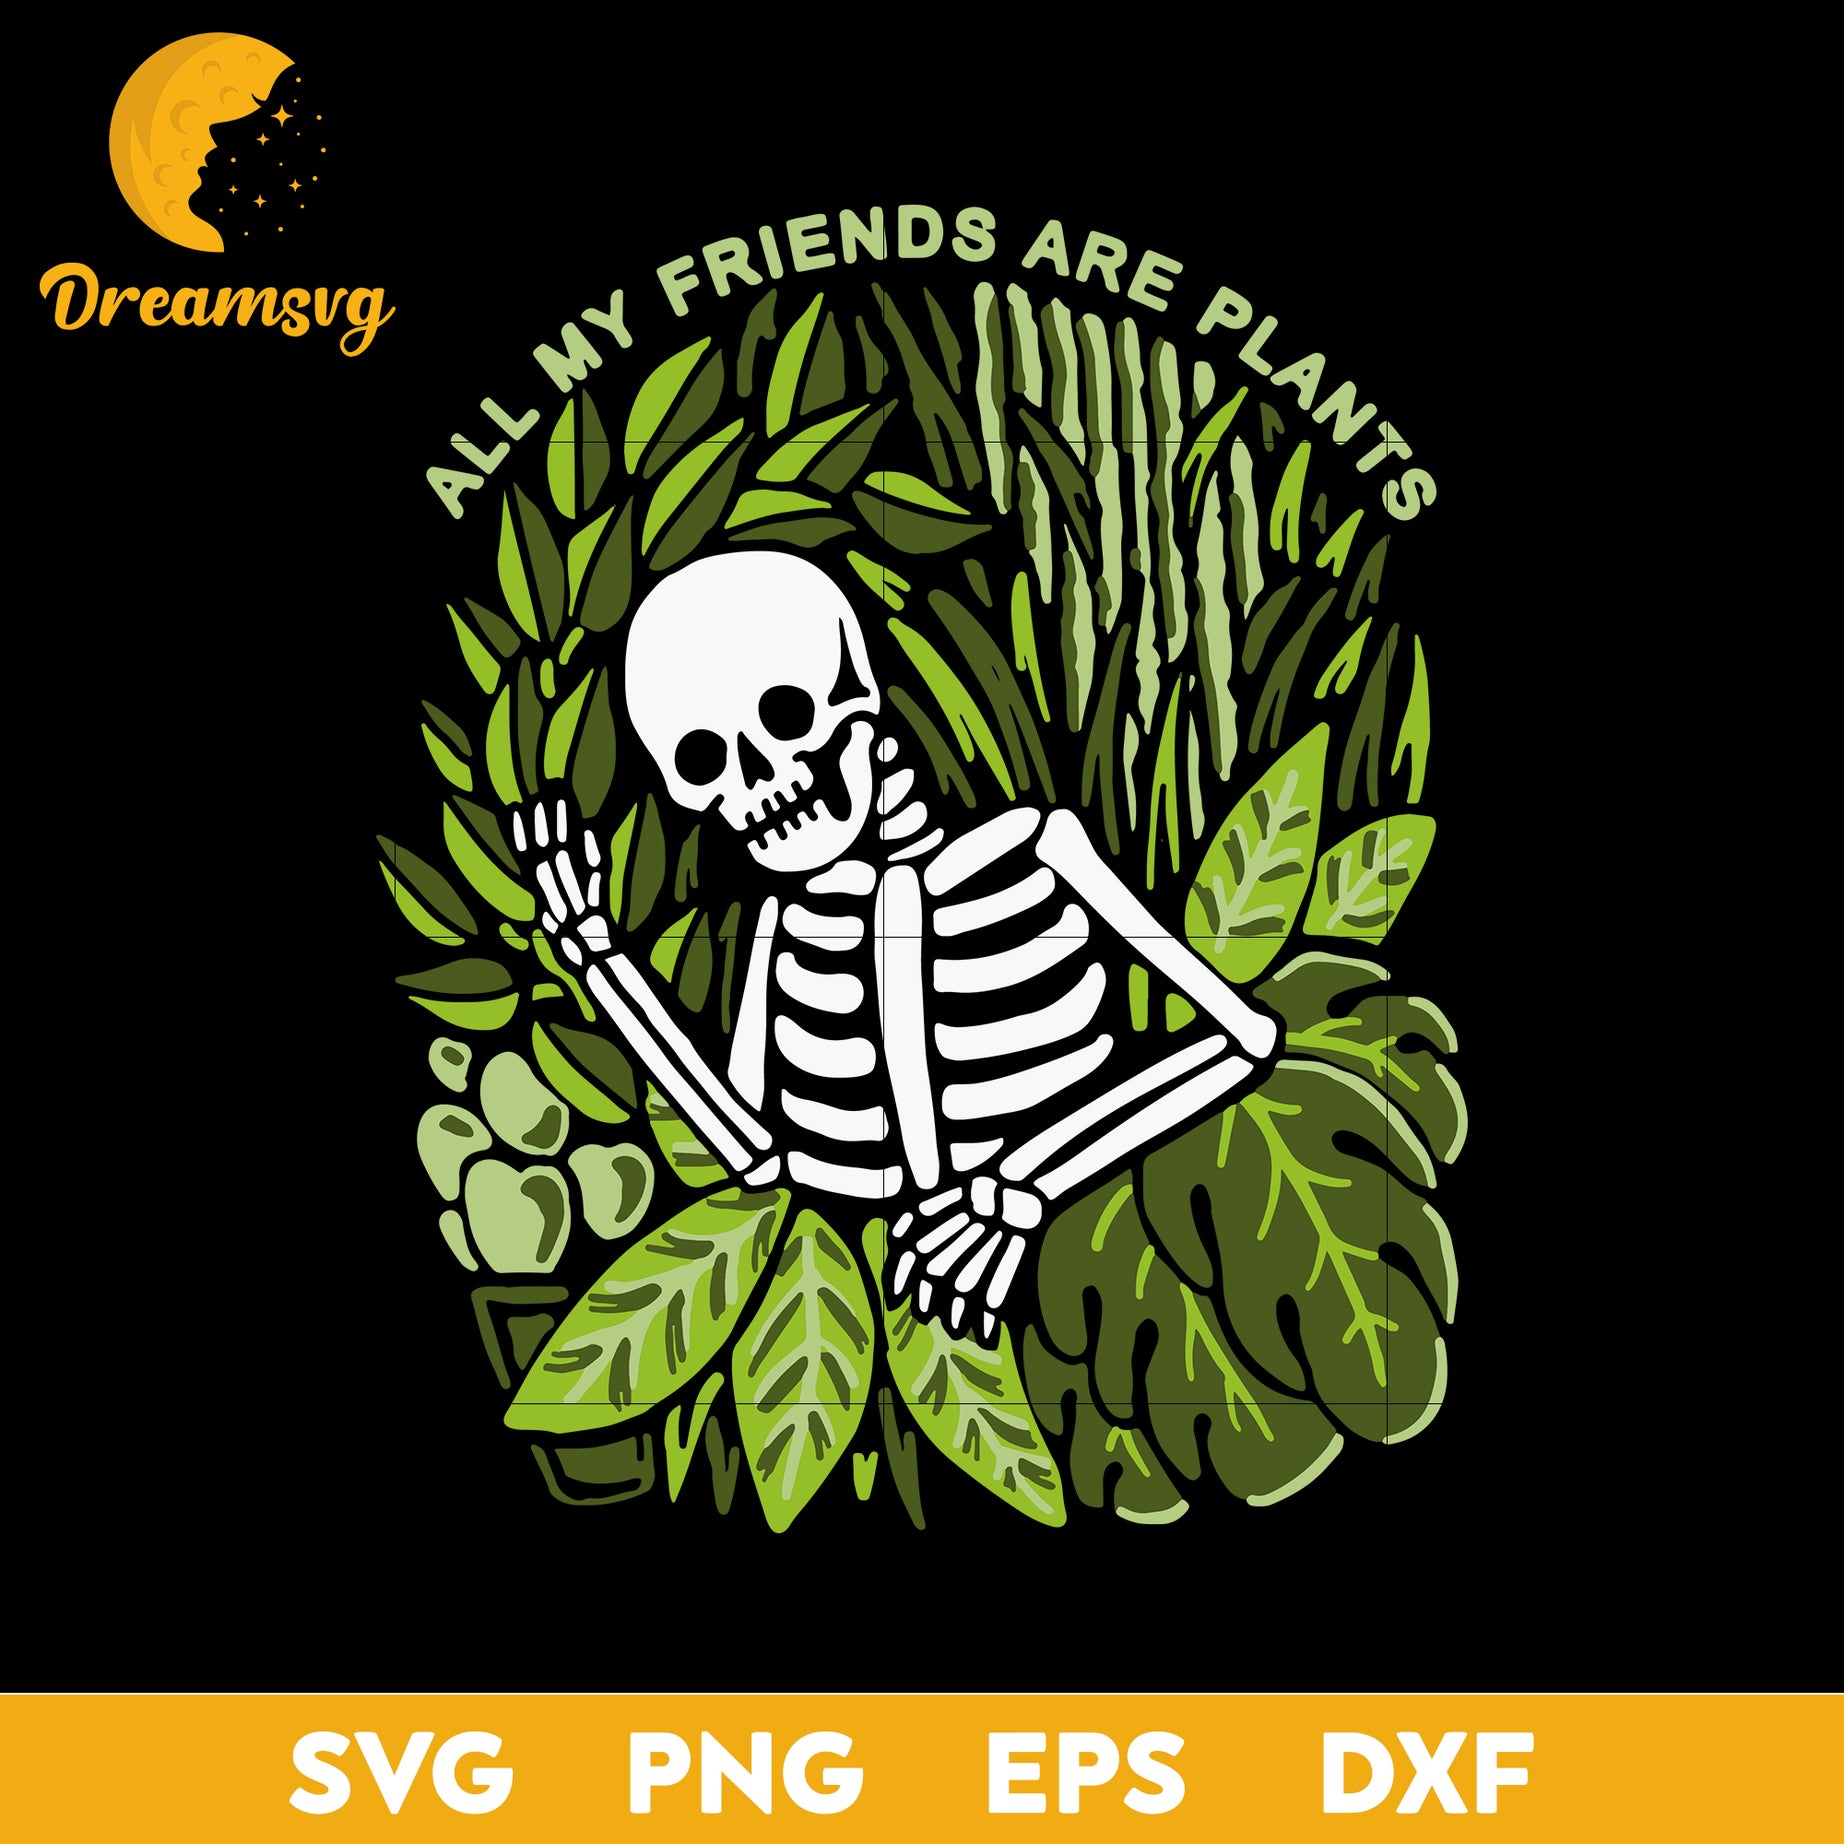 All My Friends Are Plants Svg, Funny Svg, Png, Dxf, Eps Digital File.